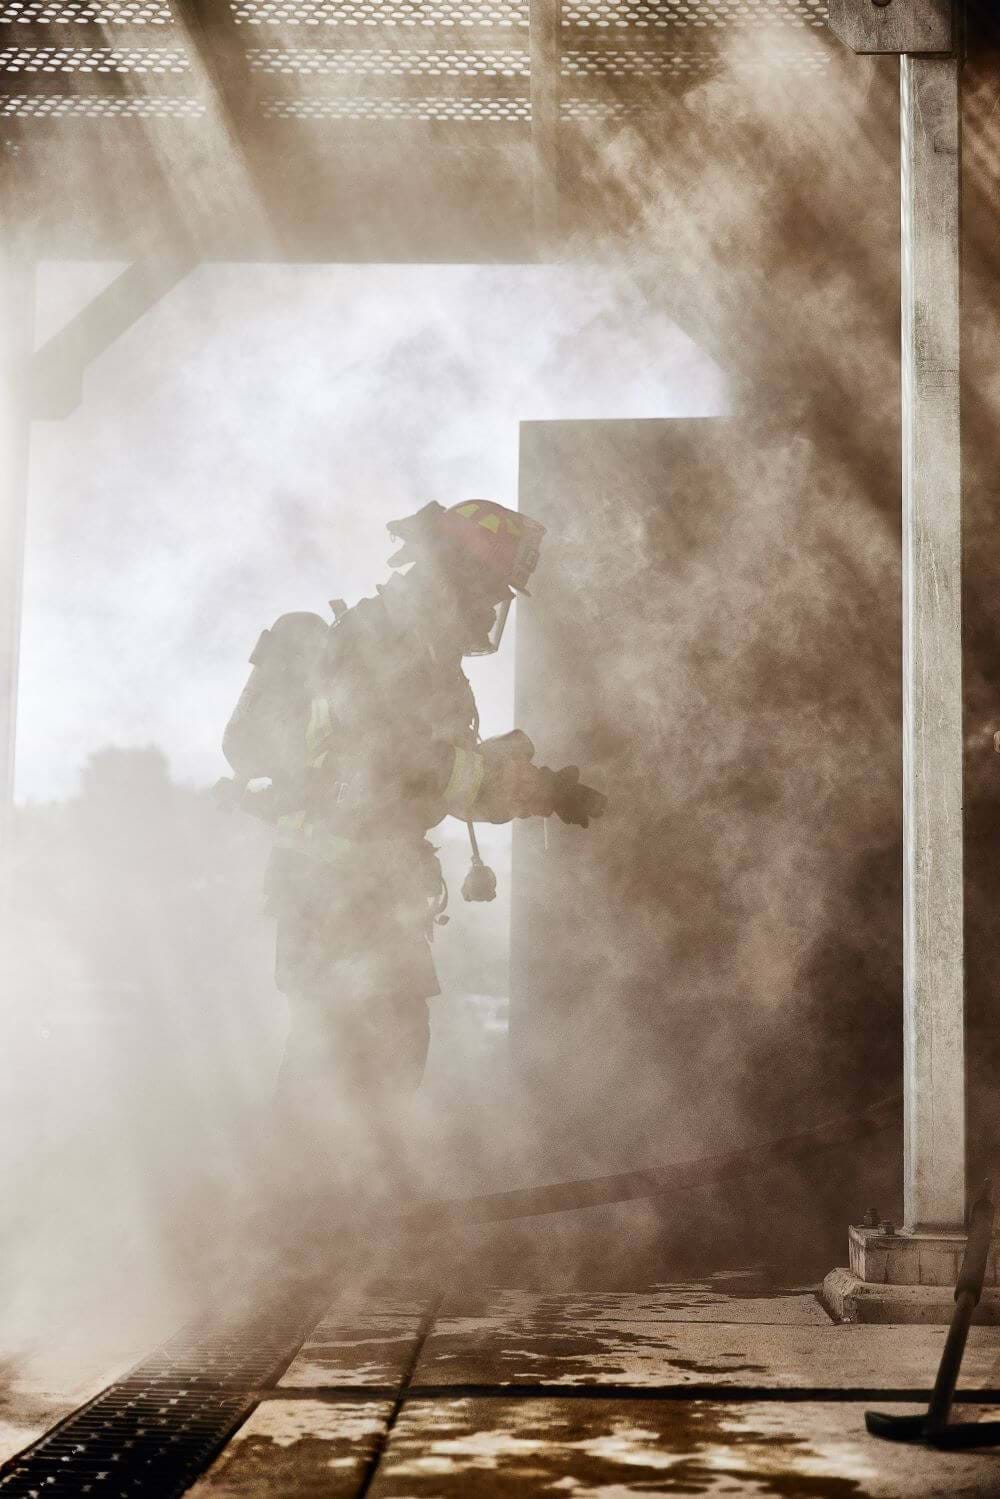 Silhouette of firefighter standing in a plume of smoke near building